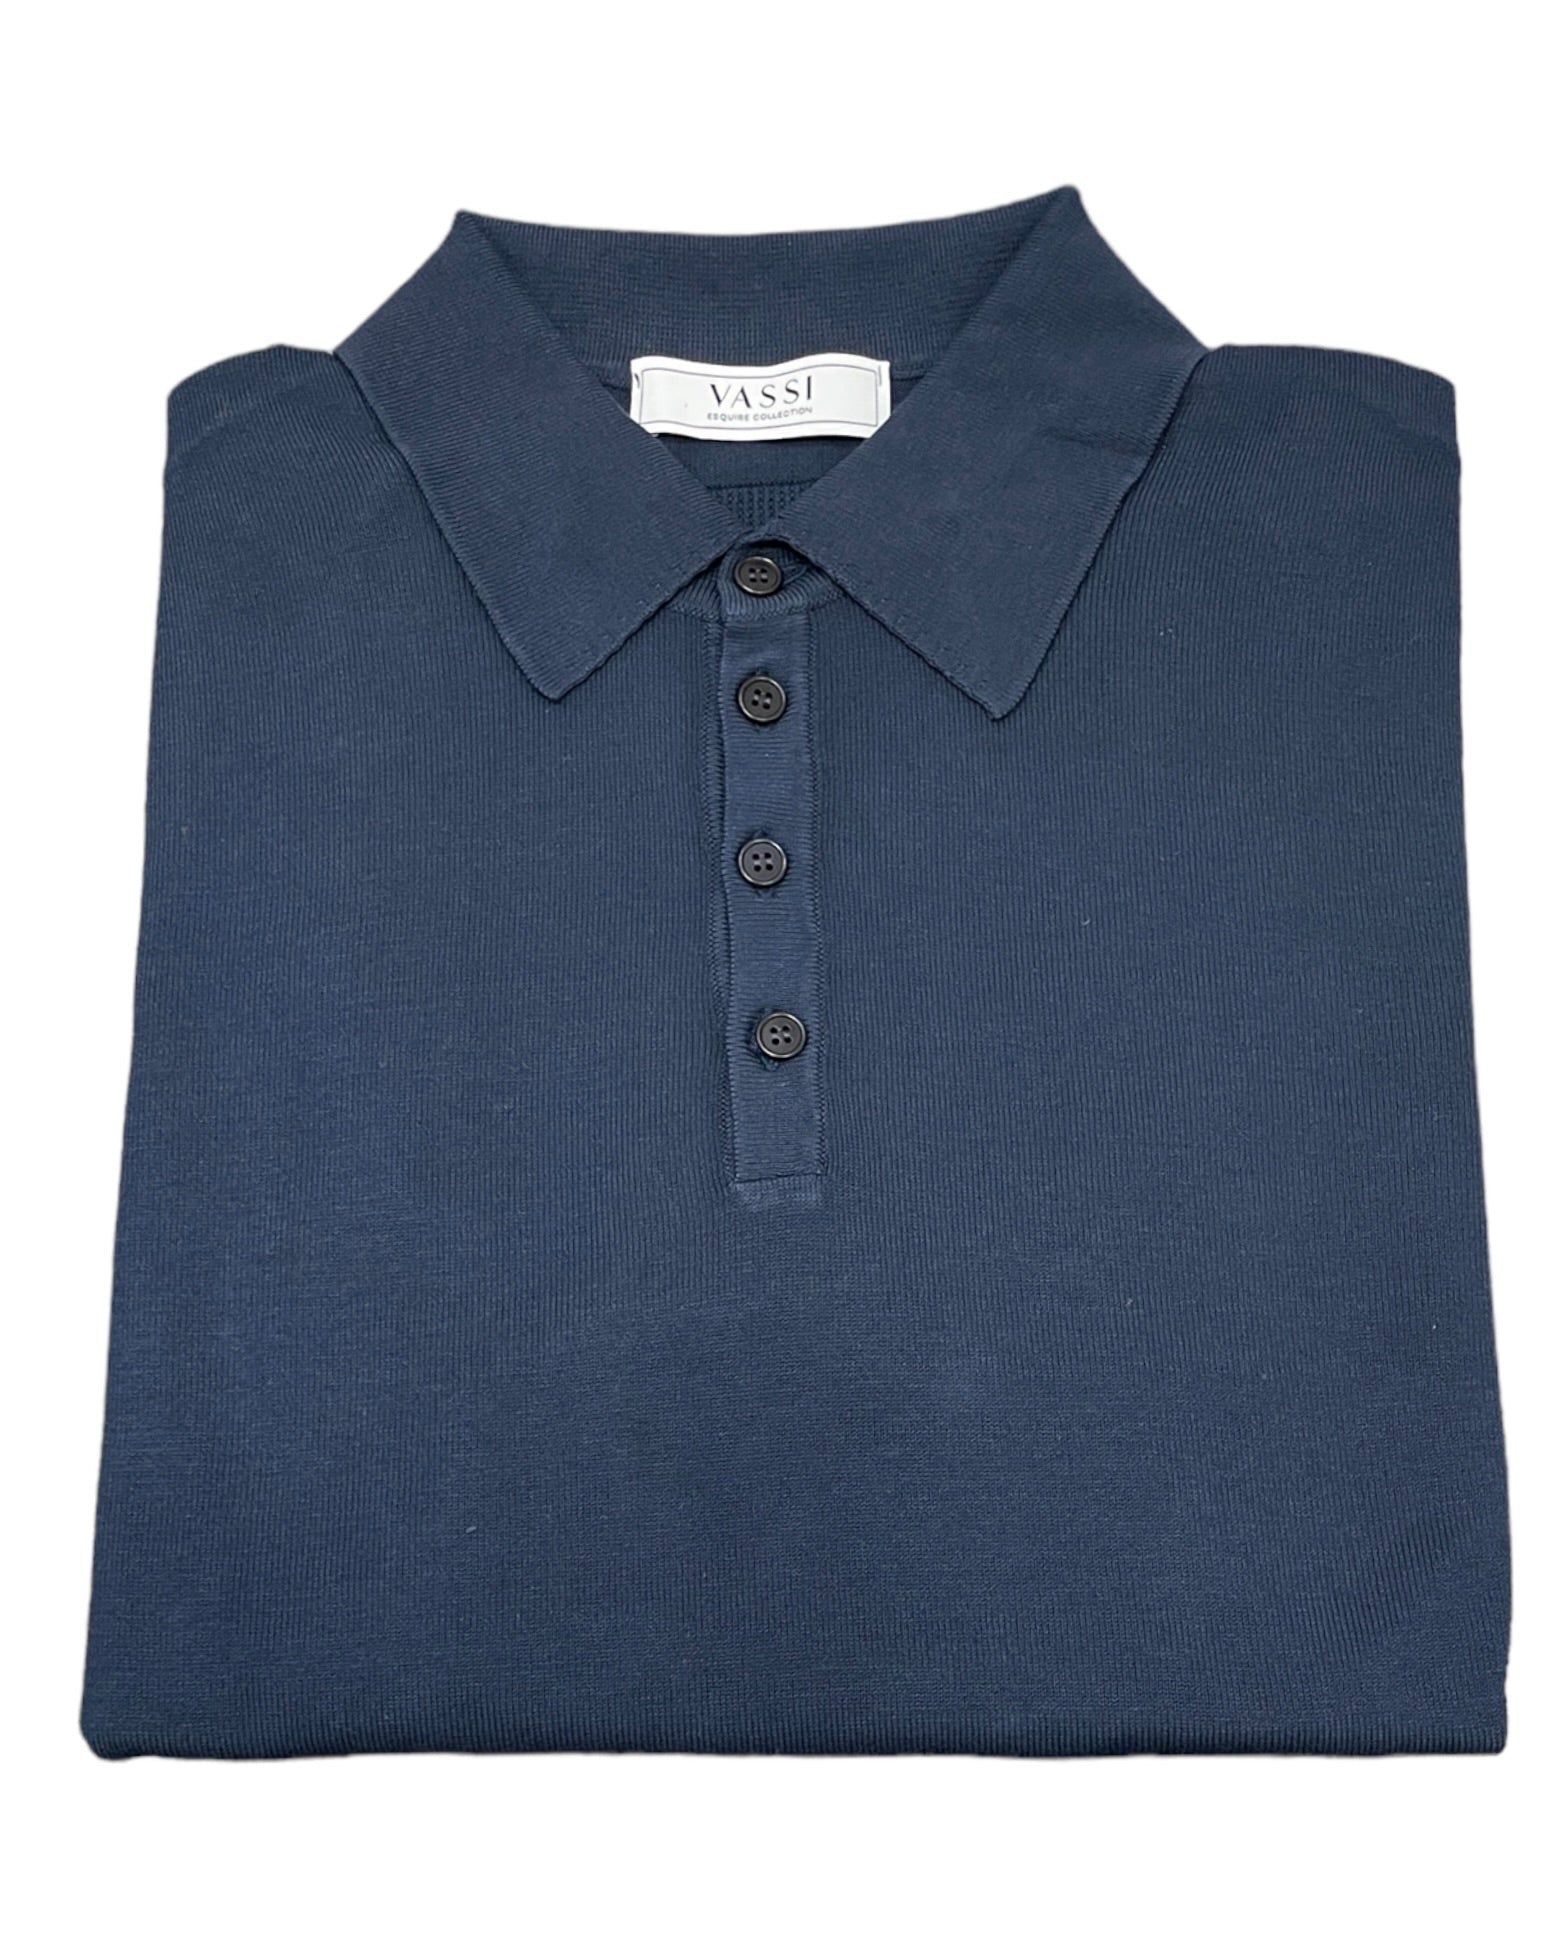 Long-Sleeve Cotton Polo - Navy SWEATERSM